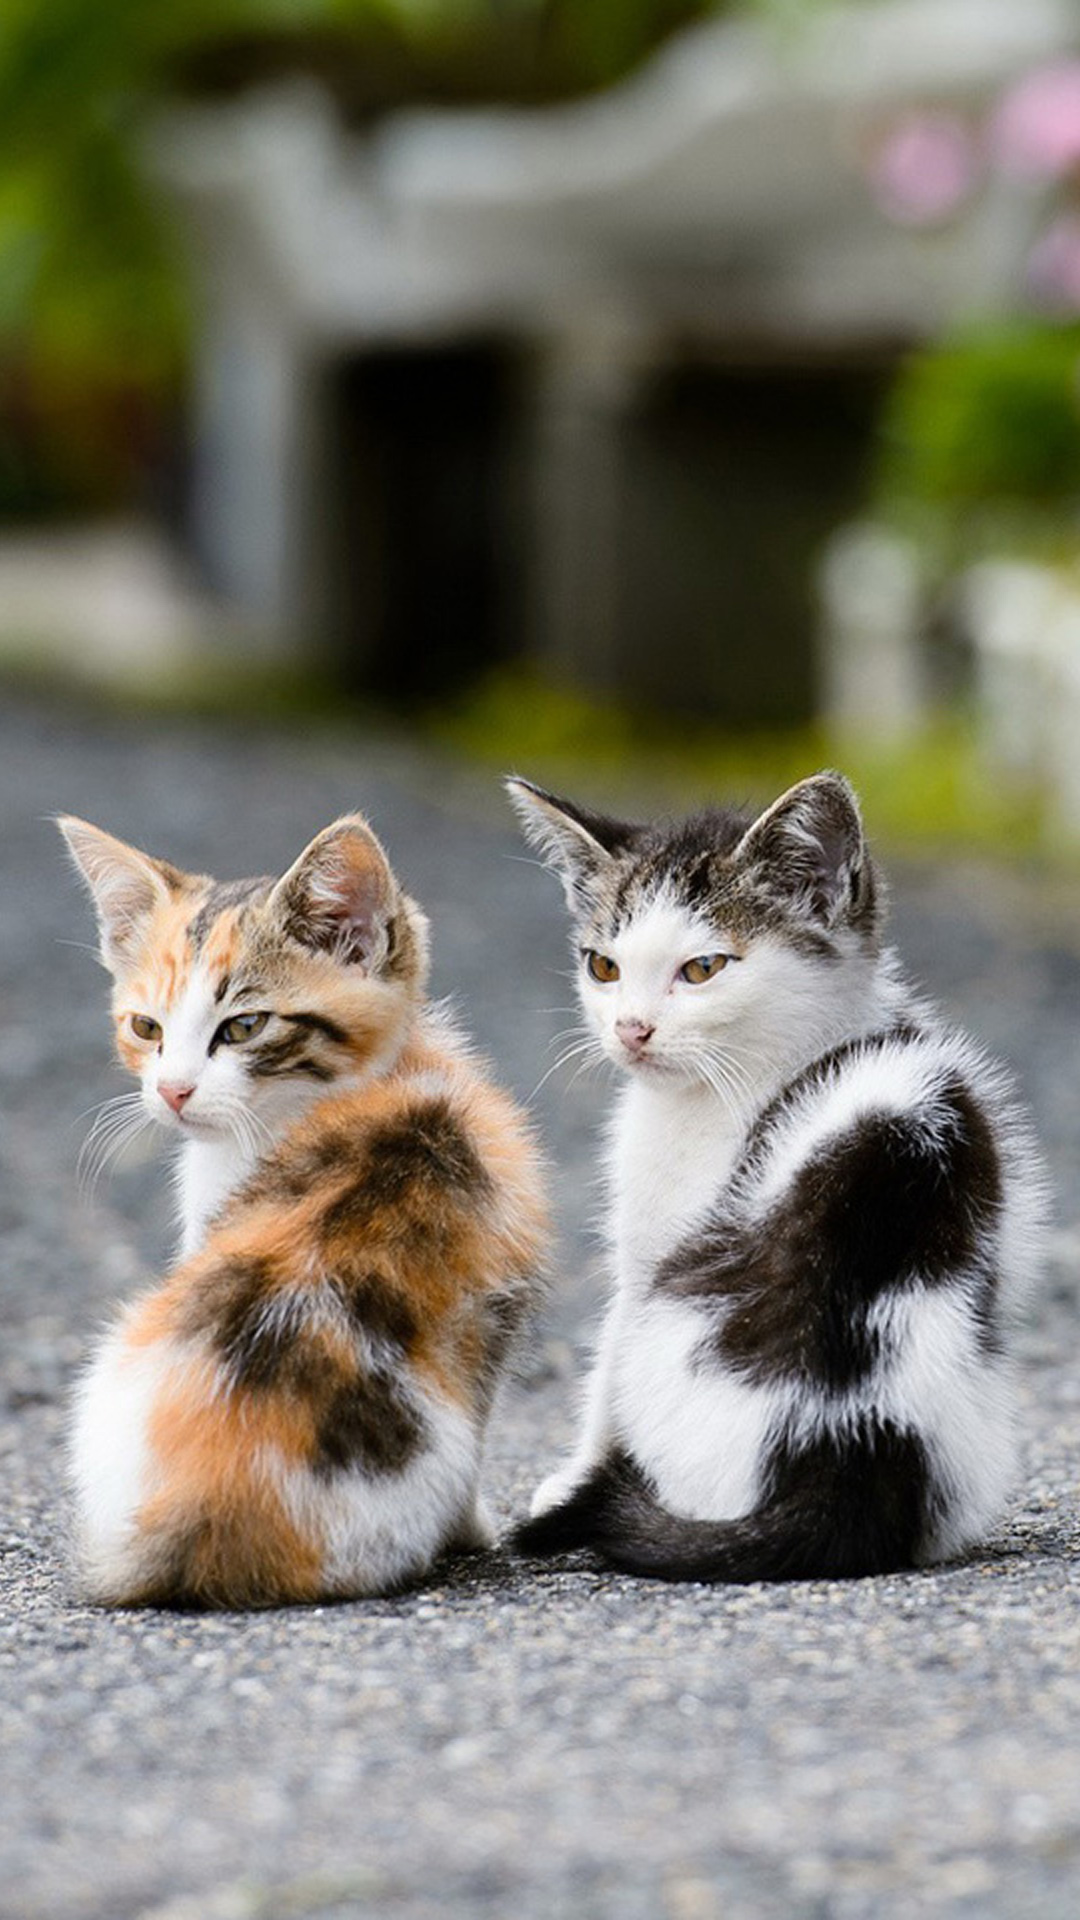 Two Very Cute Cats